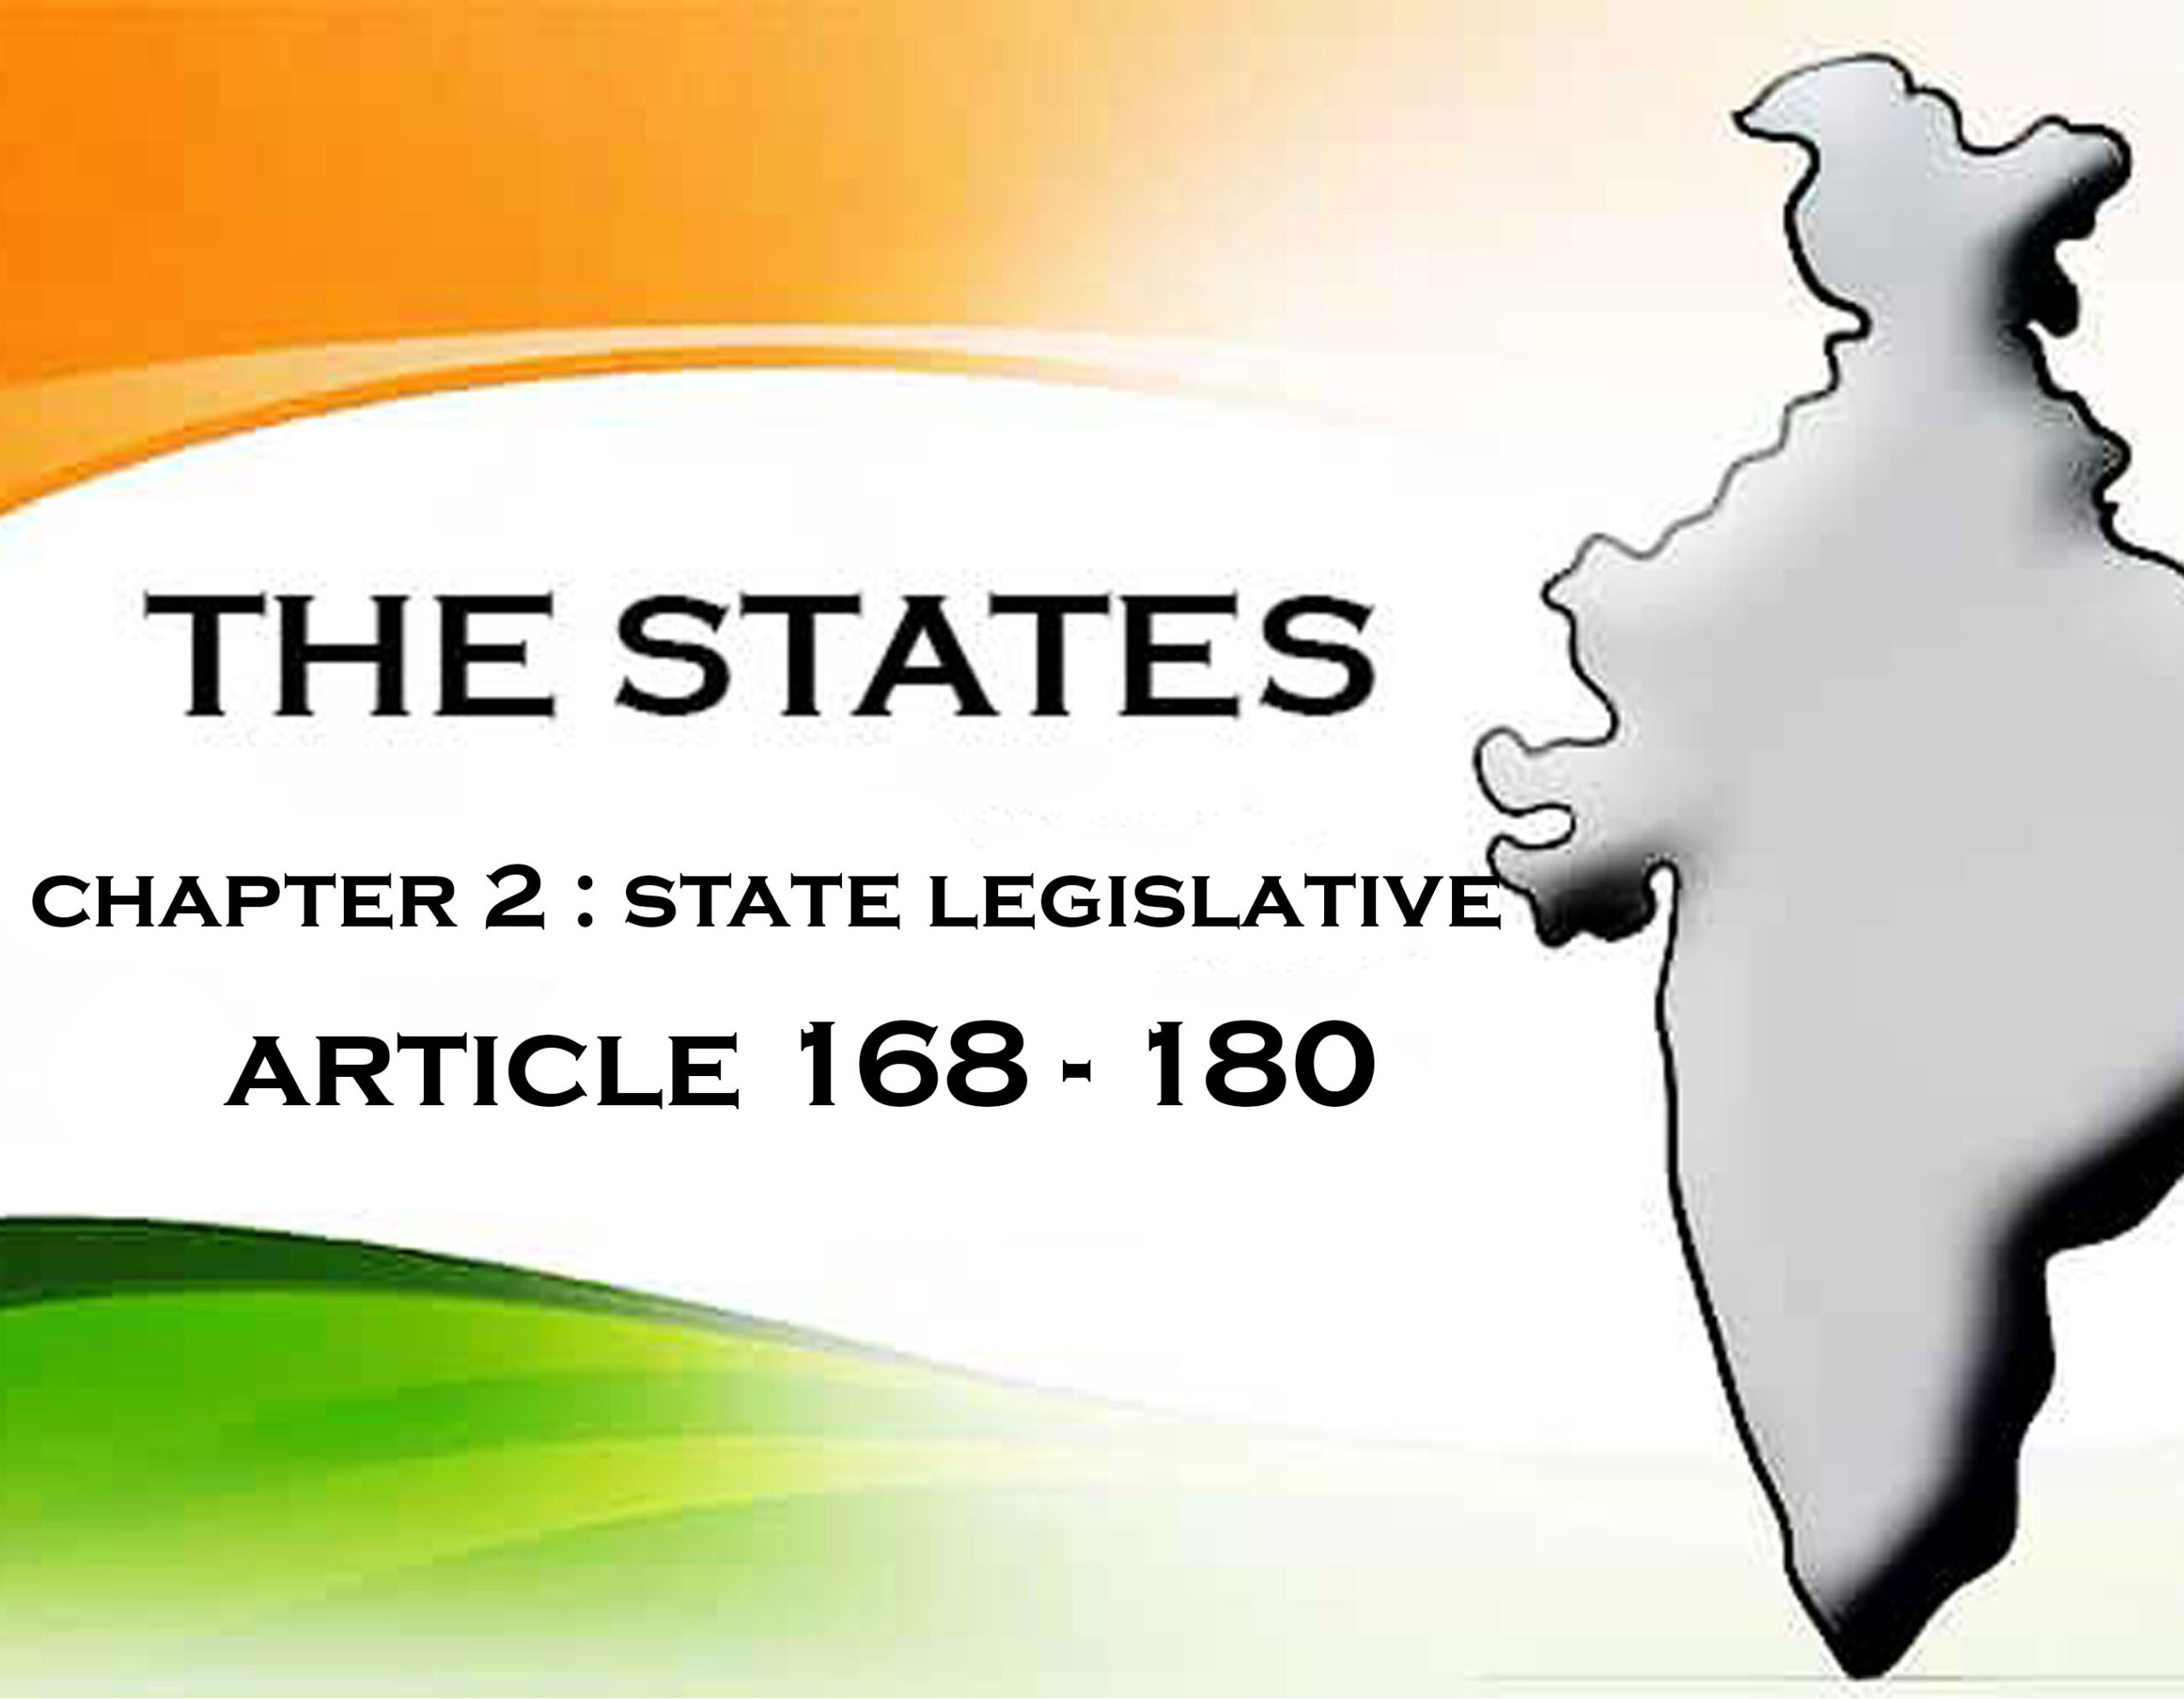 Chapter 2 : The State Legislature (Article 168-180)